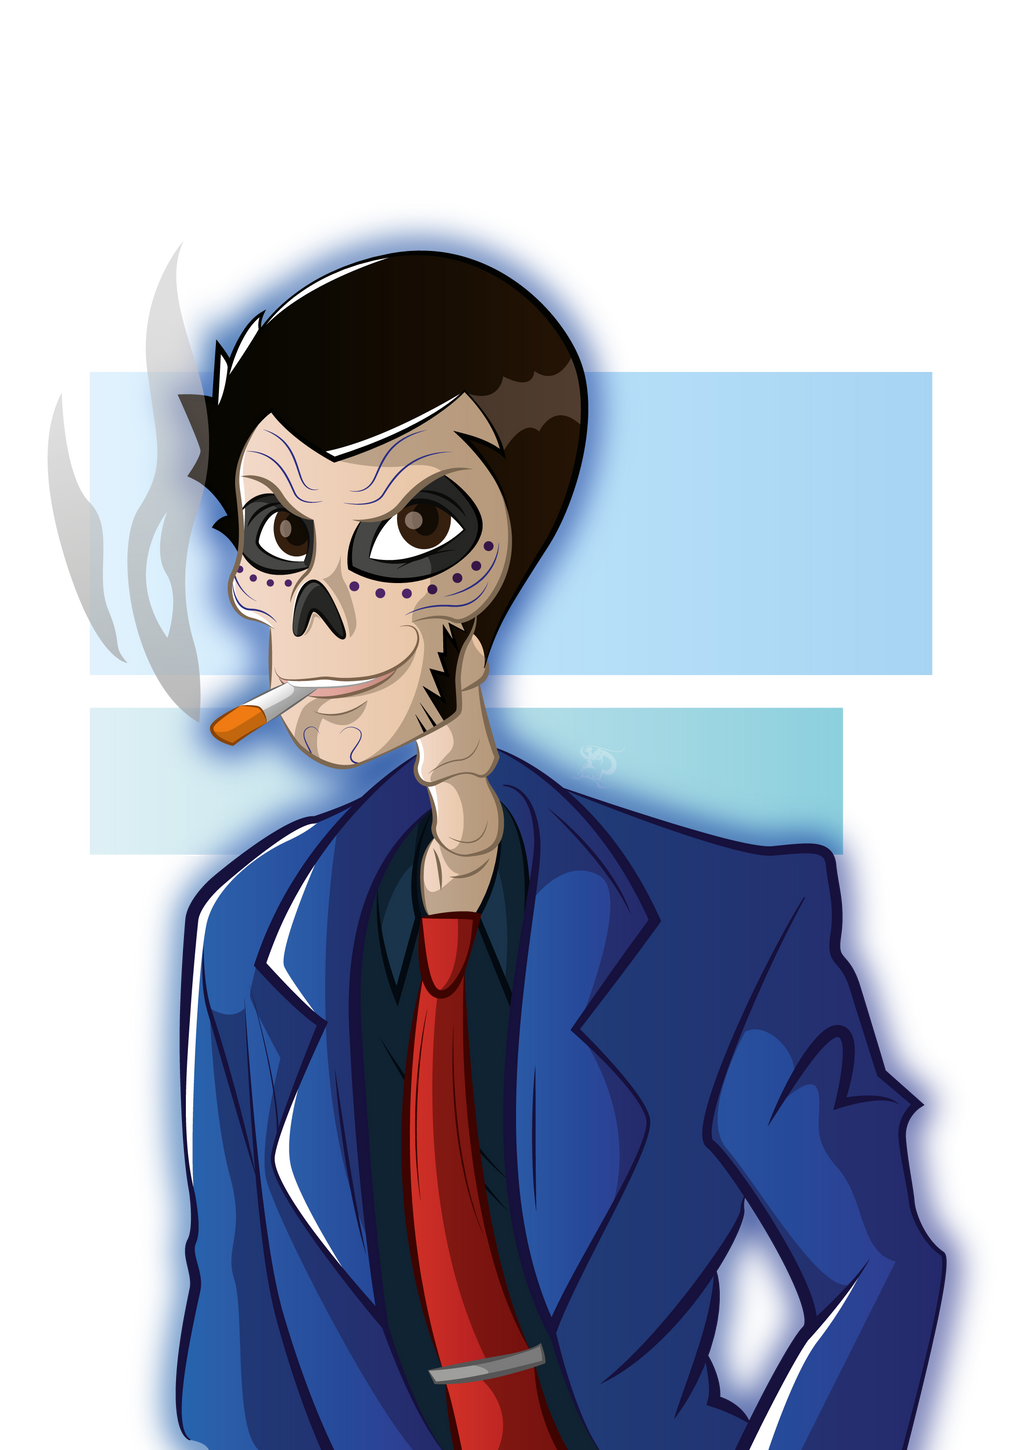 lupin_iii___skeleton_by_flyn_lunicorne_demrnm2-fullview.png